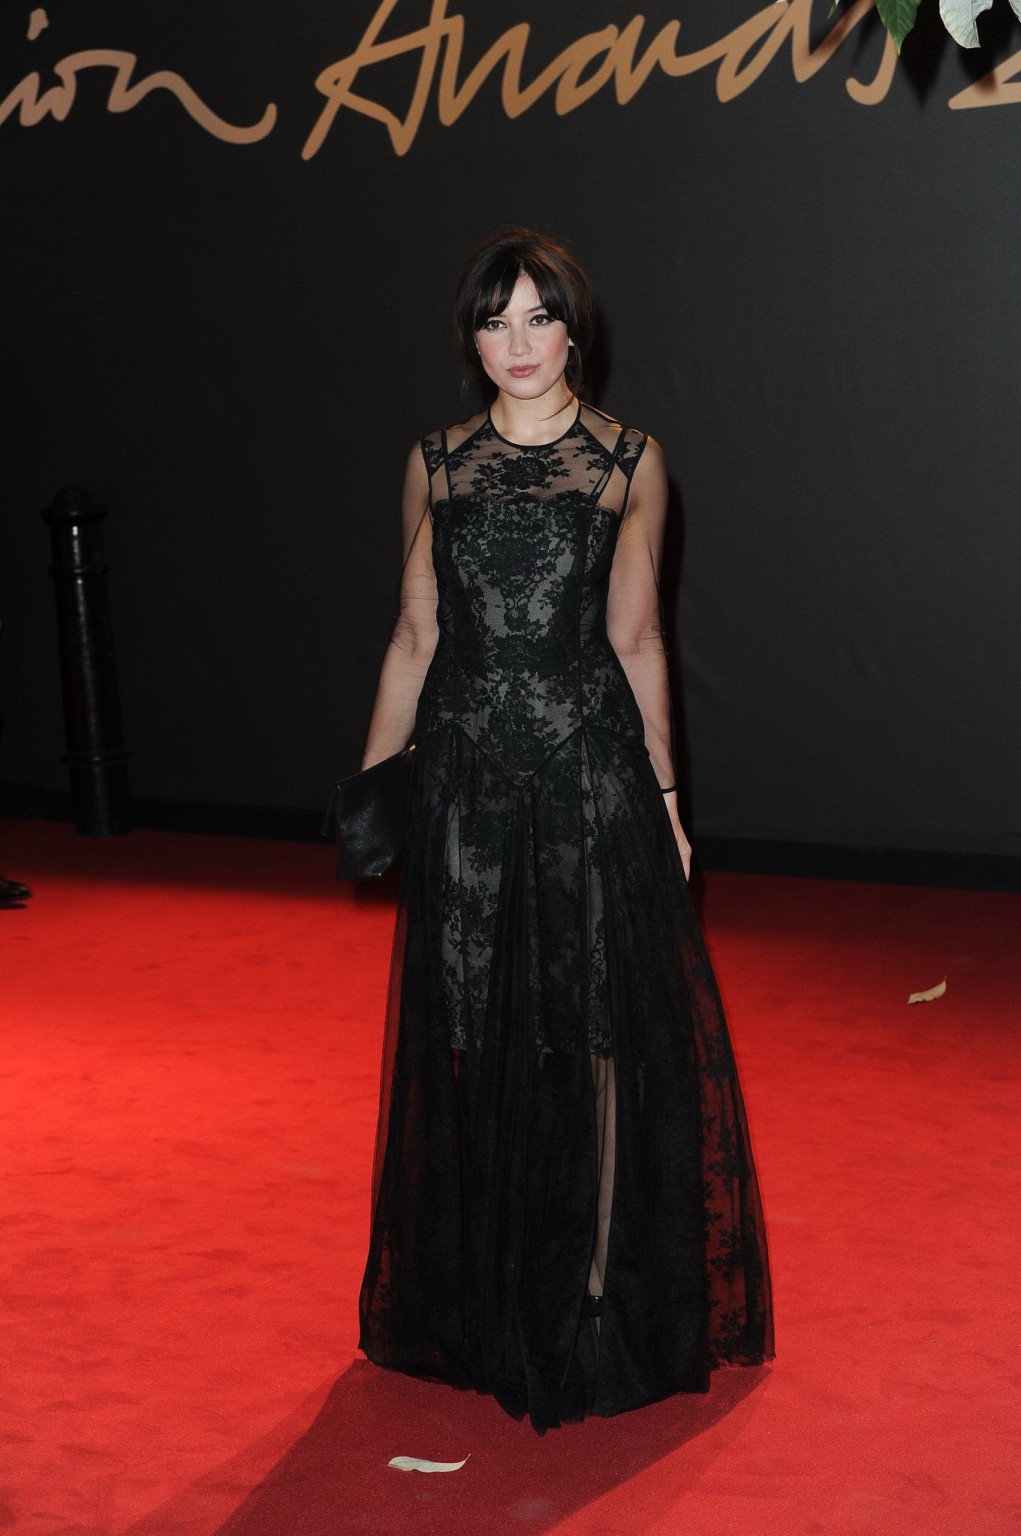 Daisy Lowe wearing black partially see-through dress at The British Fashion Awar #75211462